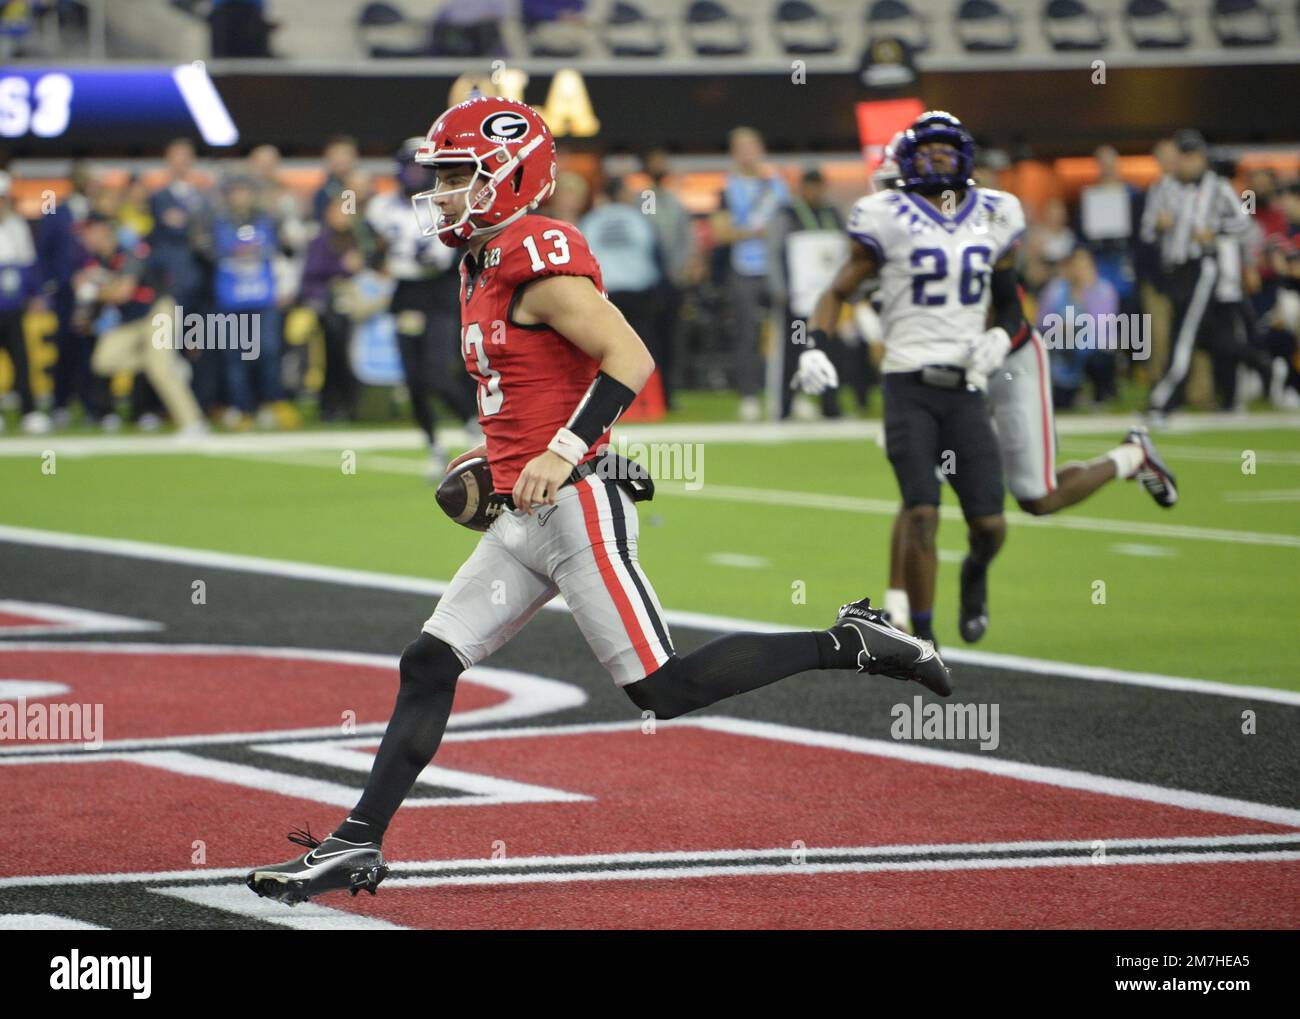 Inglewood, United States. 09th Jan, 2023. Georgia Bulldogs quarterback Stetson Bennett scores a touchdown in the first half against the TCU Horned Frogs at the 2023 NCAA College Football National Championship between Georgia and TCU at SoFi Stadium in Inglewood, California, on Monday, January 9, 2023. Photo by Mike Goulding/UPI Credit: UPI/Alamy Live News Stock Photo